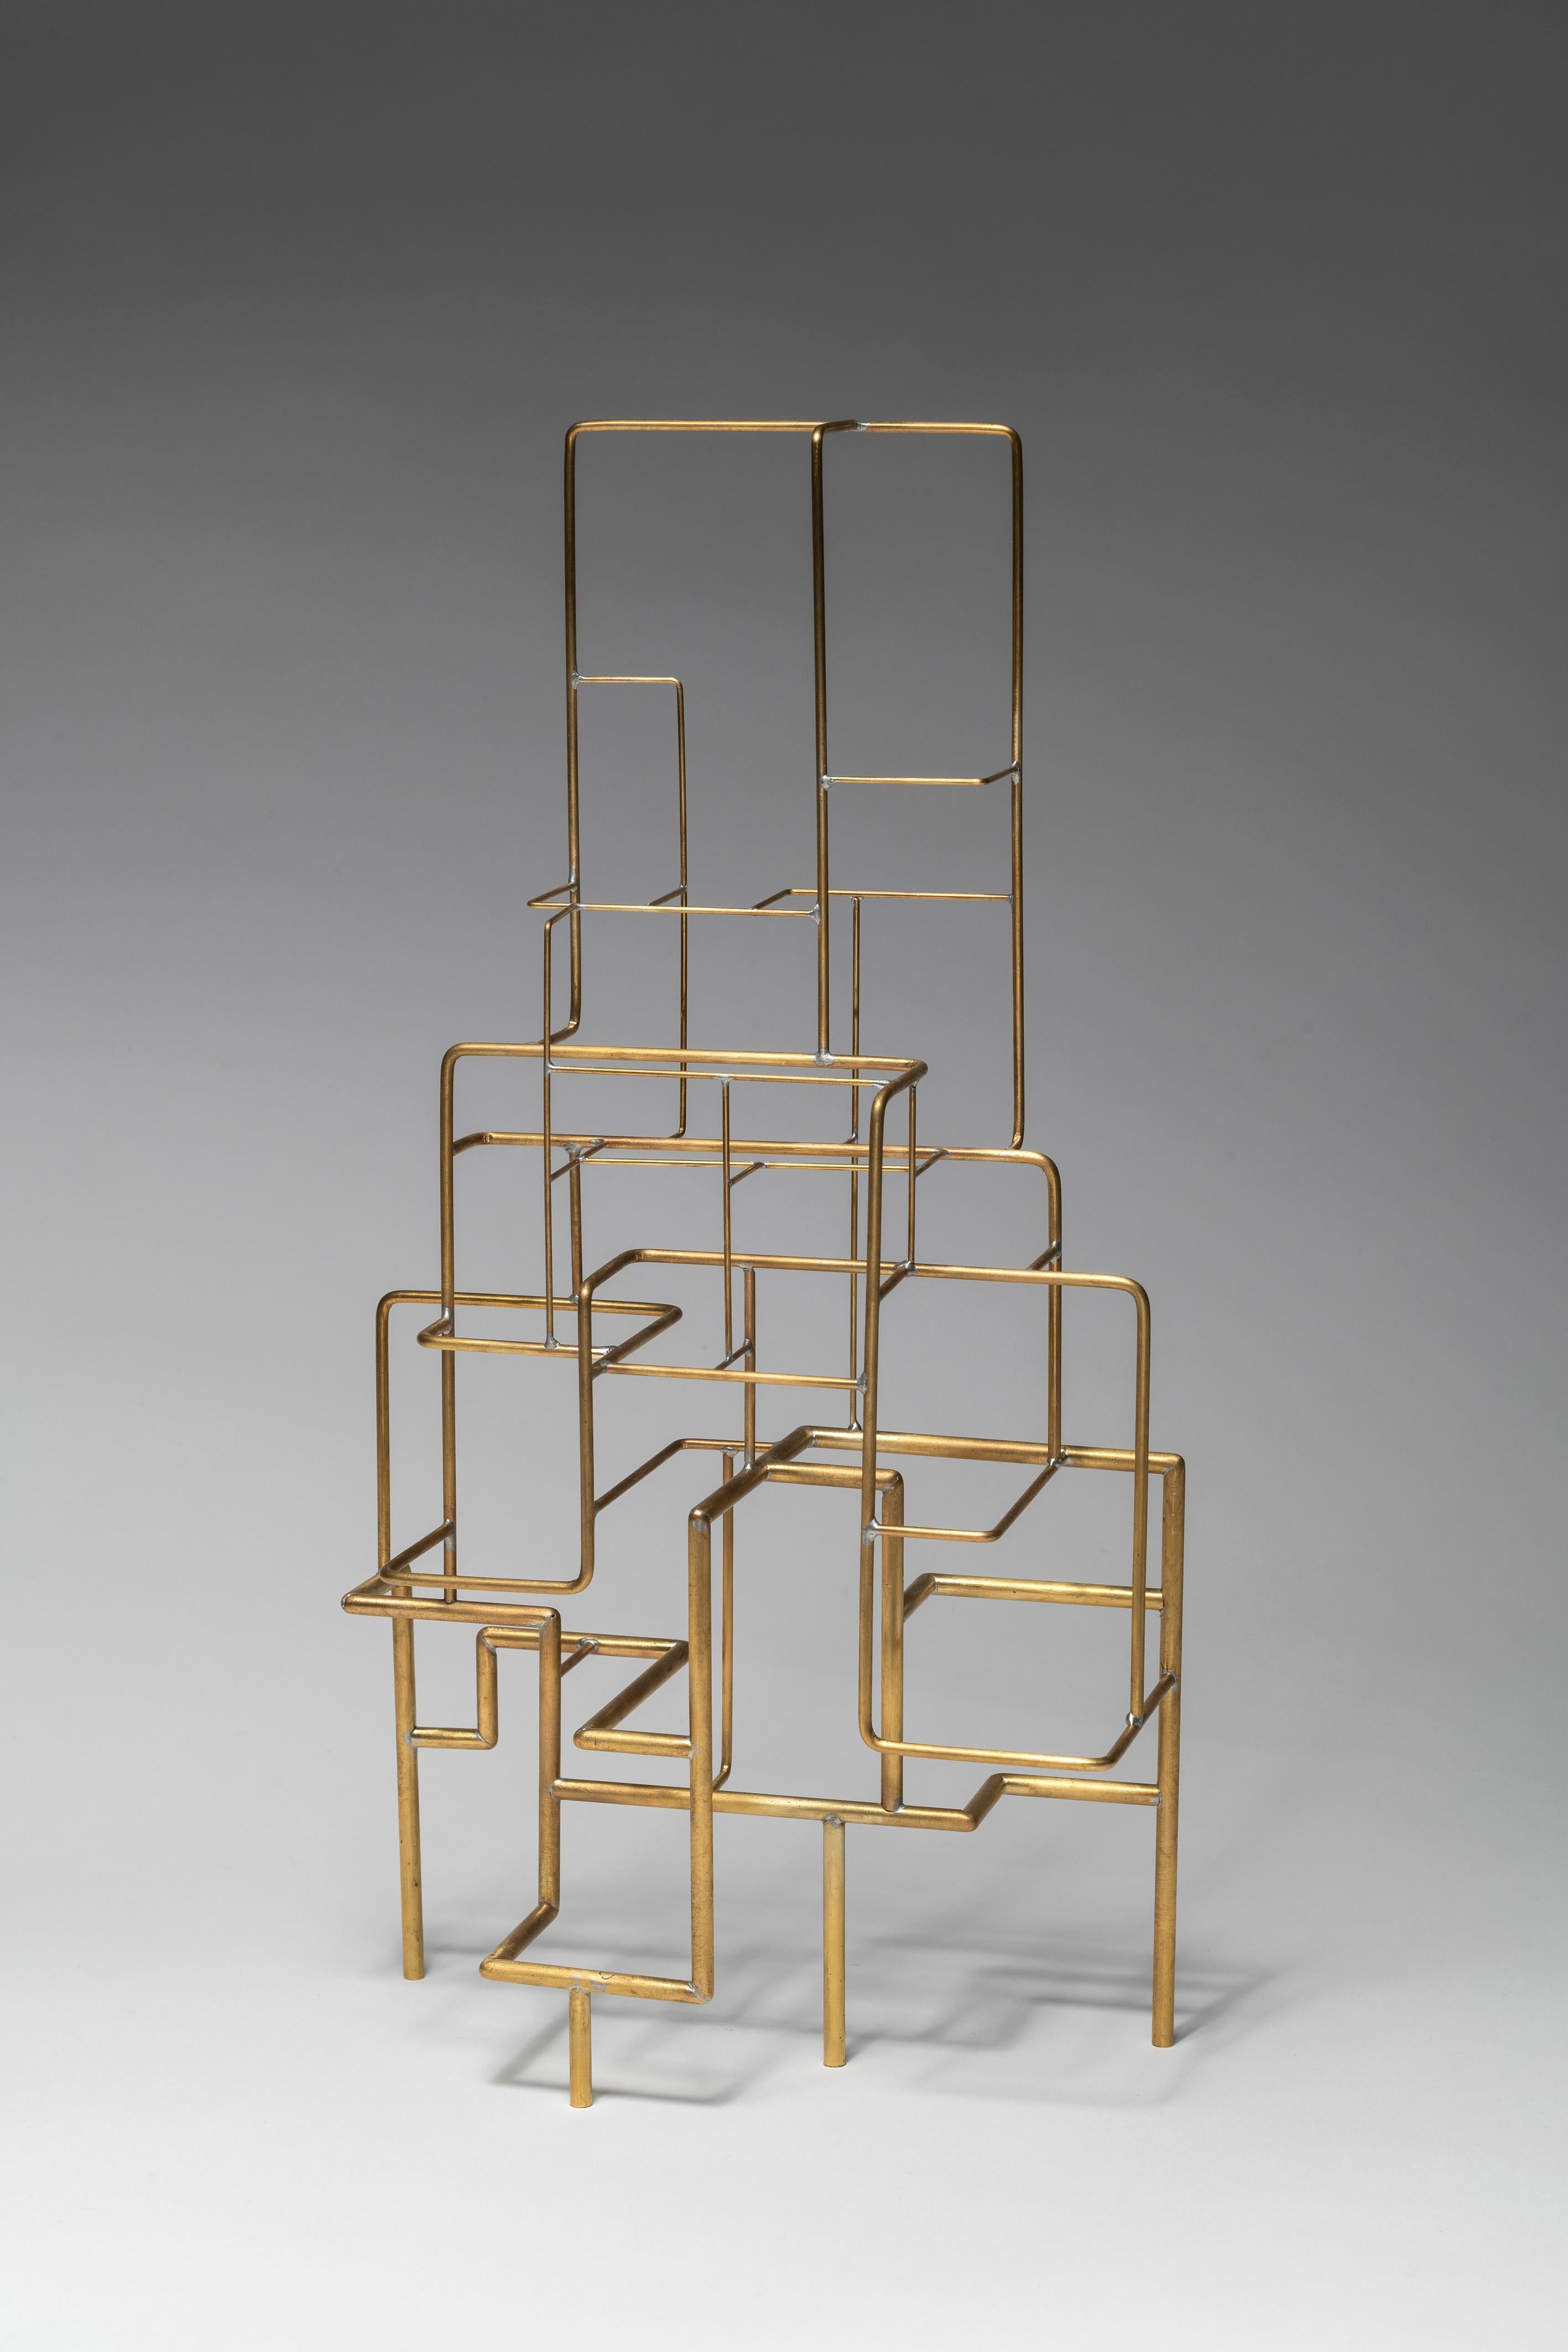 Espalier was created in 2022 by French designer Eric de Dormael. Hancrafted in brass, this is a unique piece.
Éric de Dormael is an unconventional artist, his trajectory far from the beaten track. Trained at the Saint-Luc school in Tournai and at